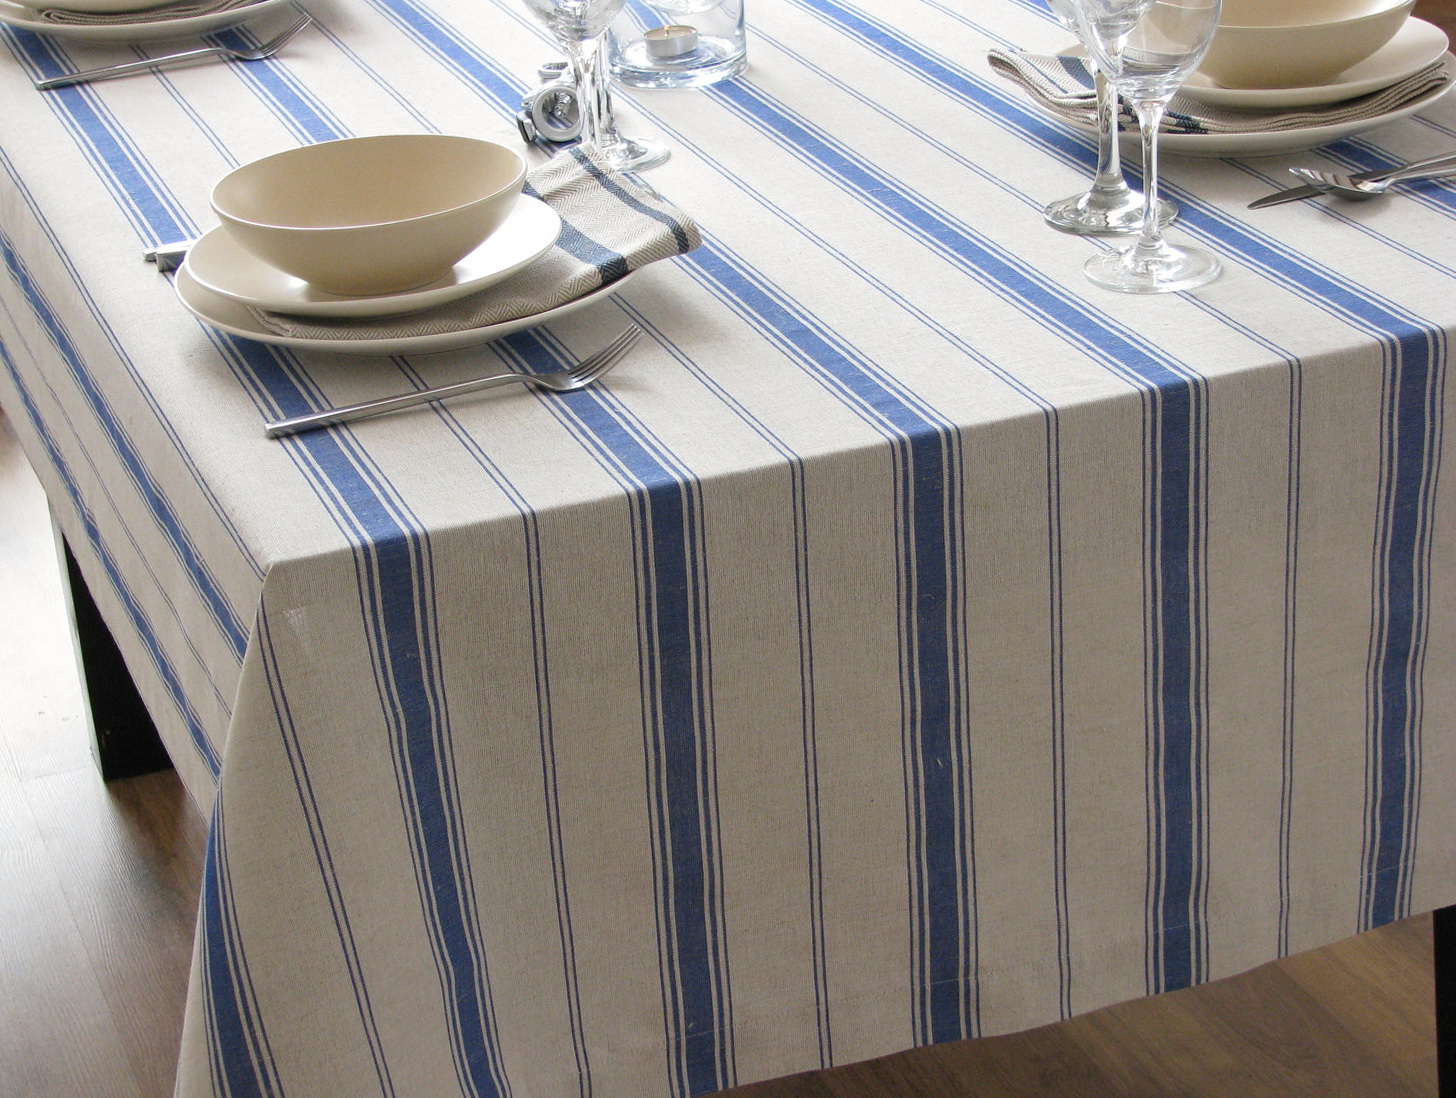 French Table Linens Wholesale